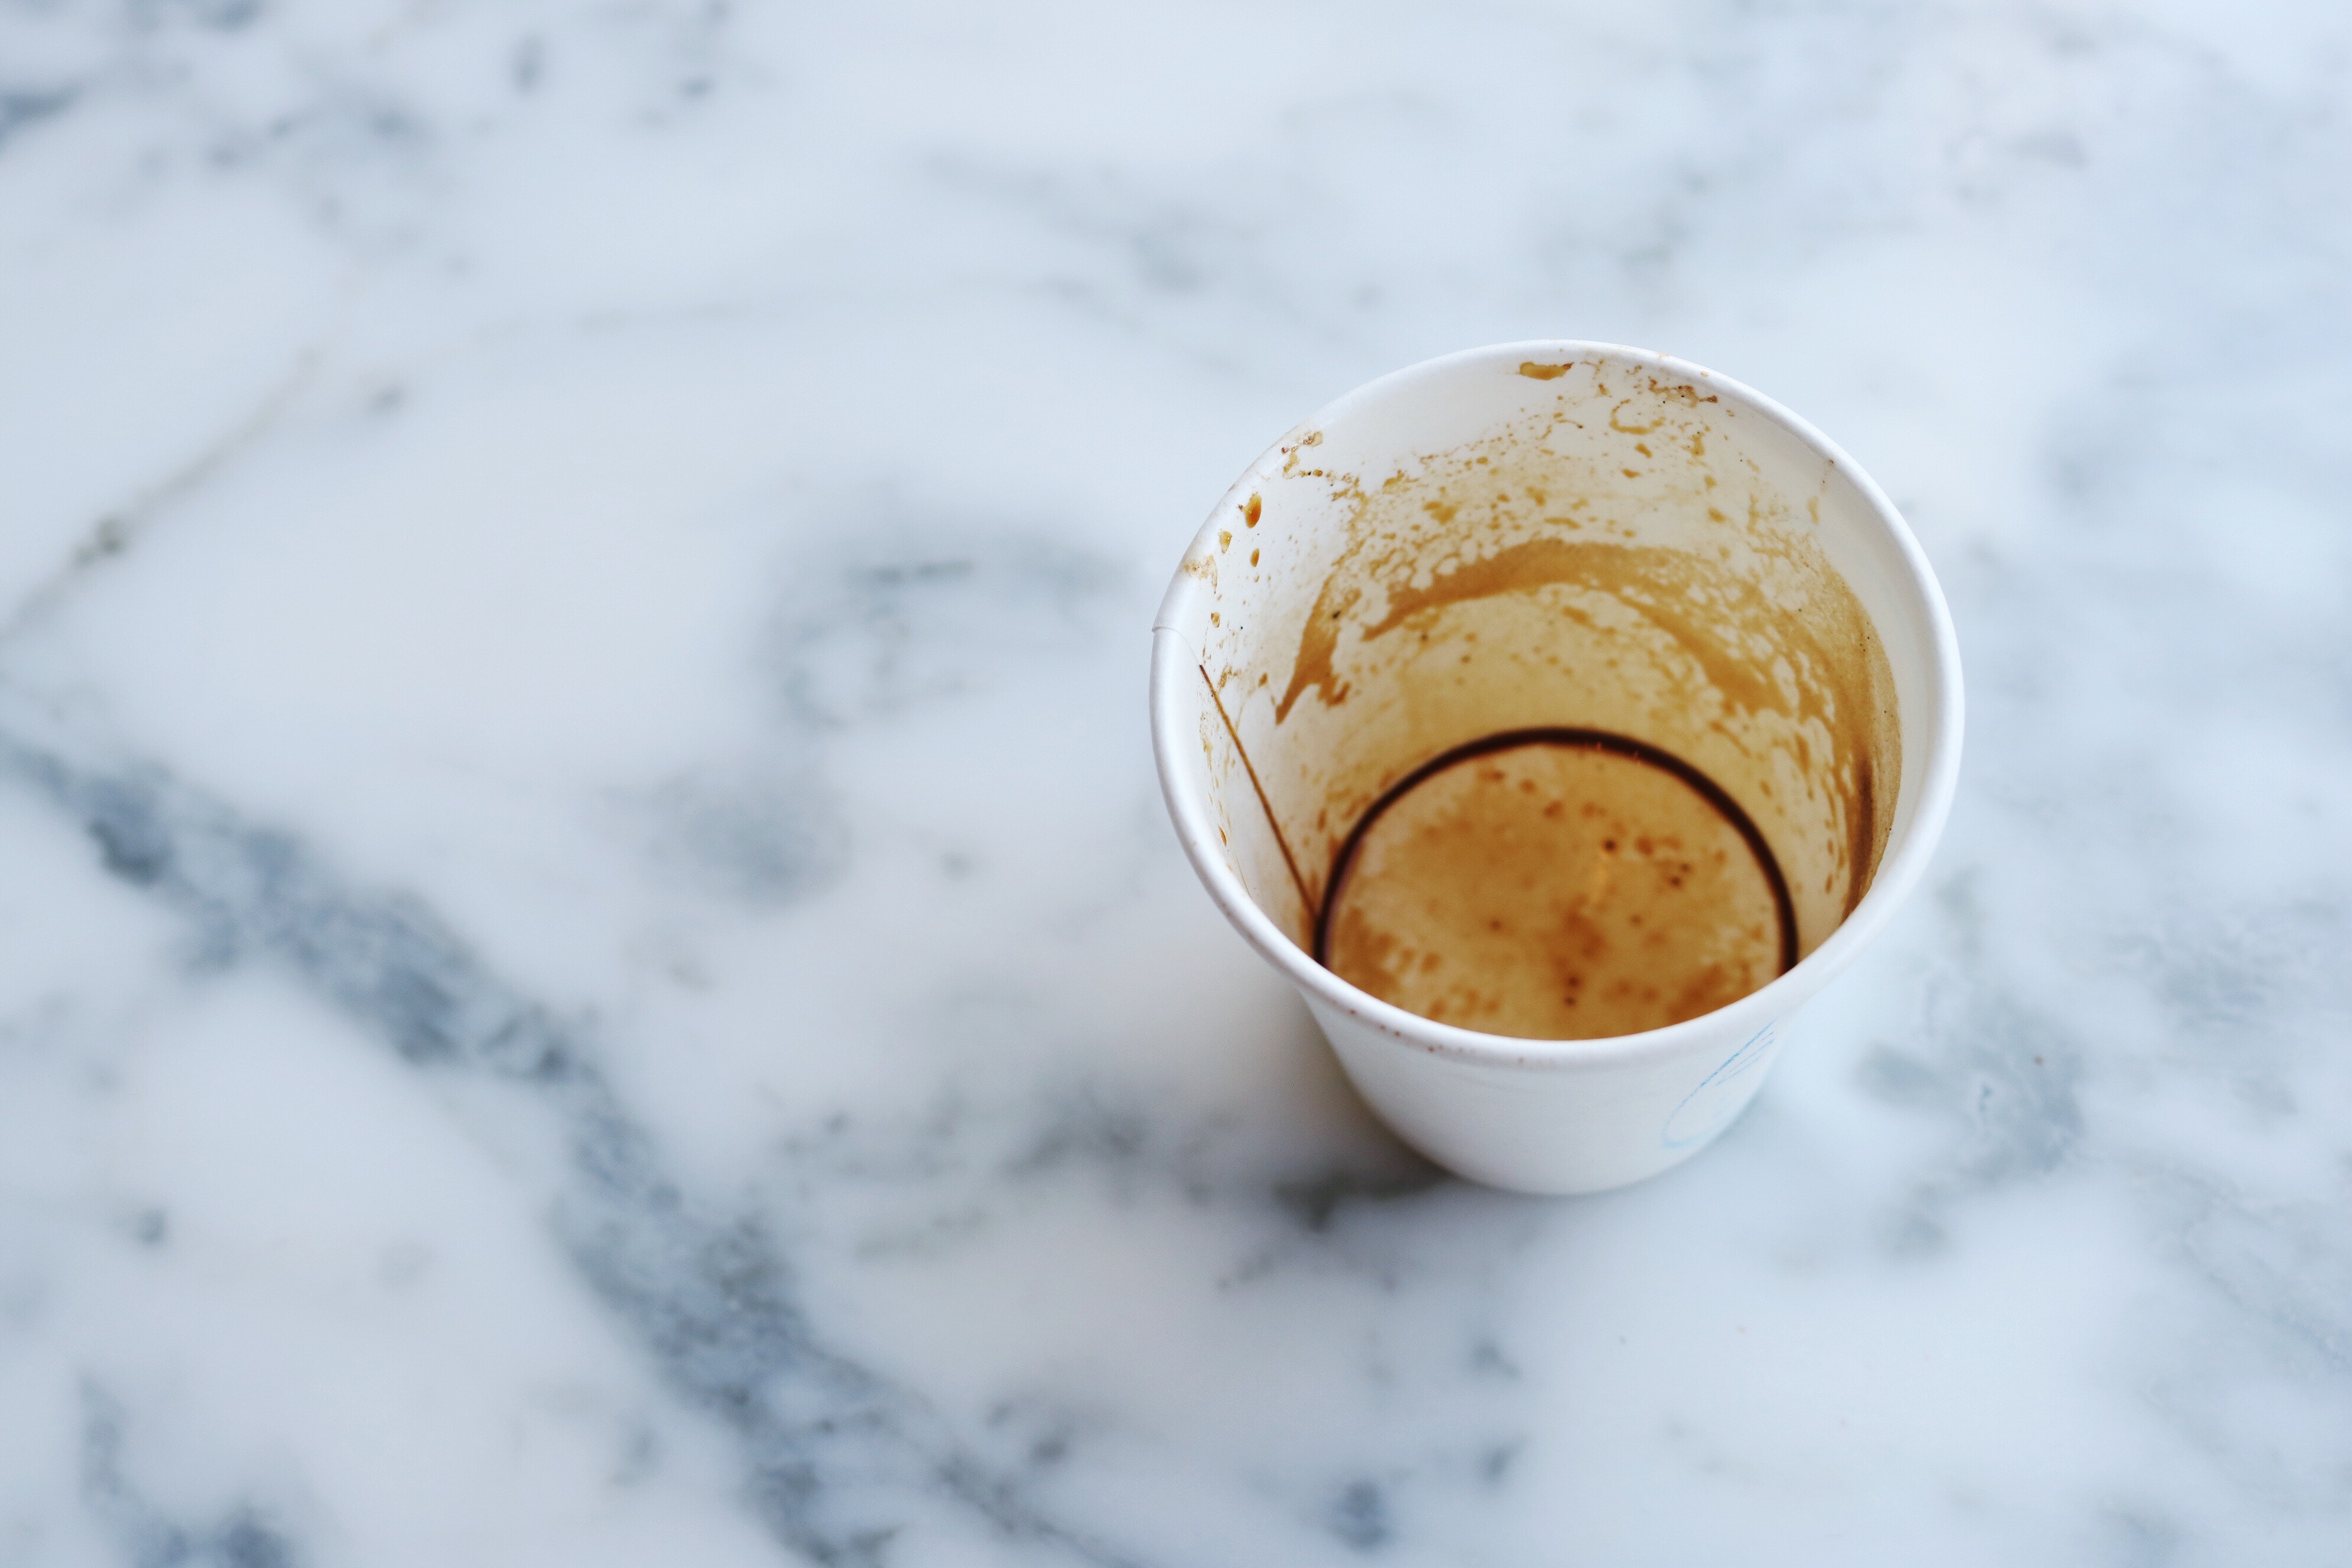 An empty white paper coffee cup sits atop a white and grey marble counter. The inside of the cup is stained with remnants of coffee.